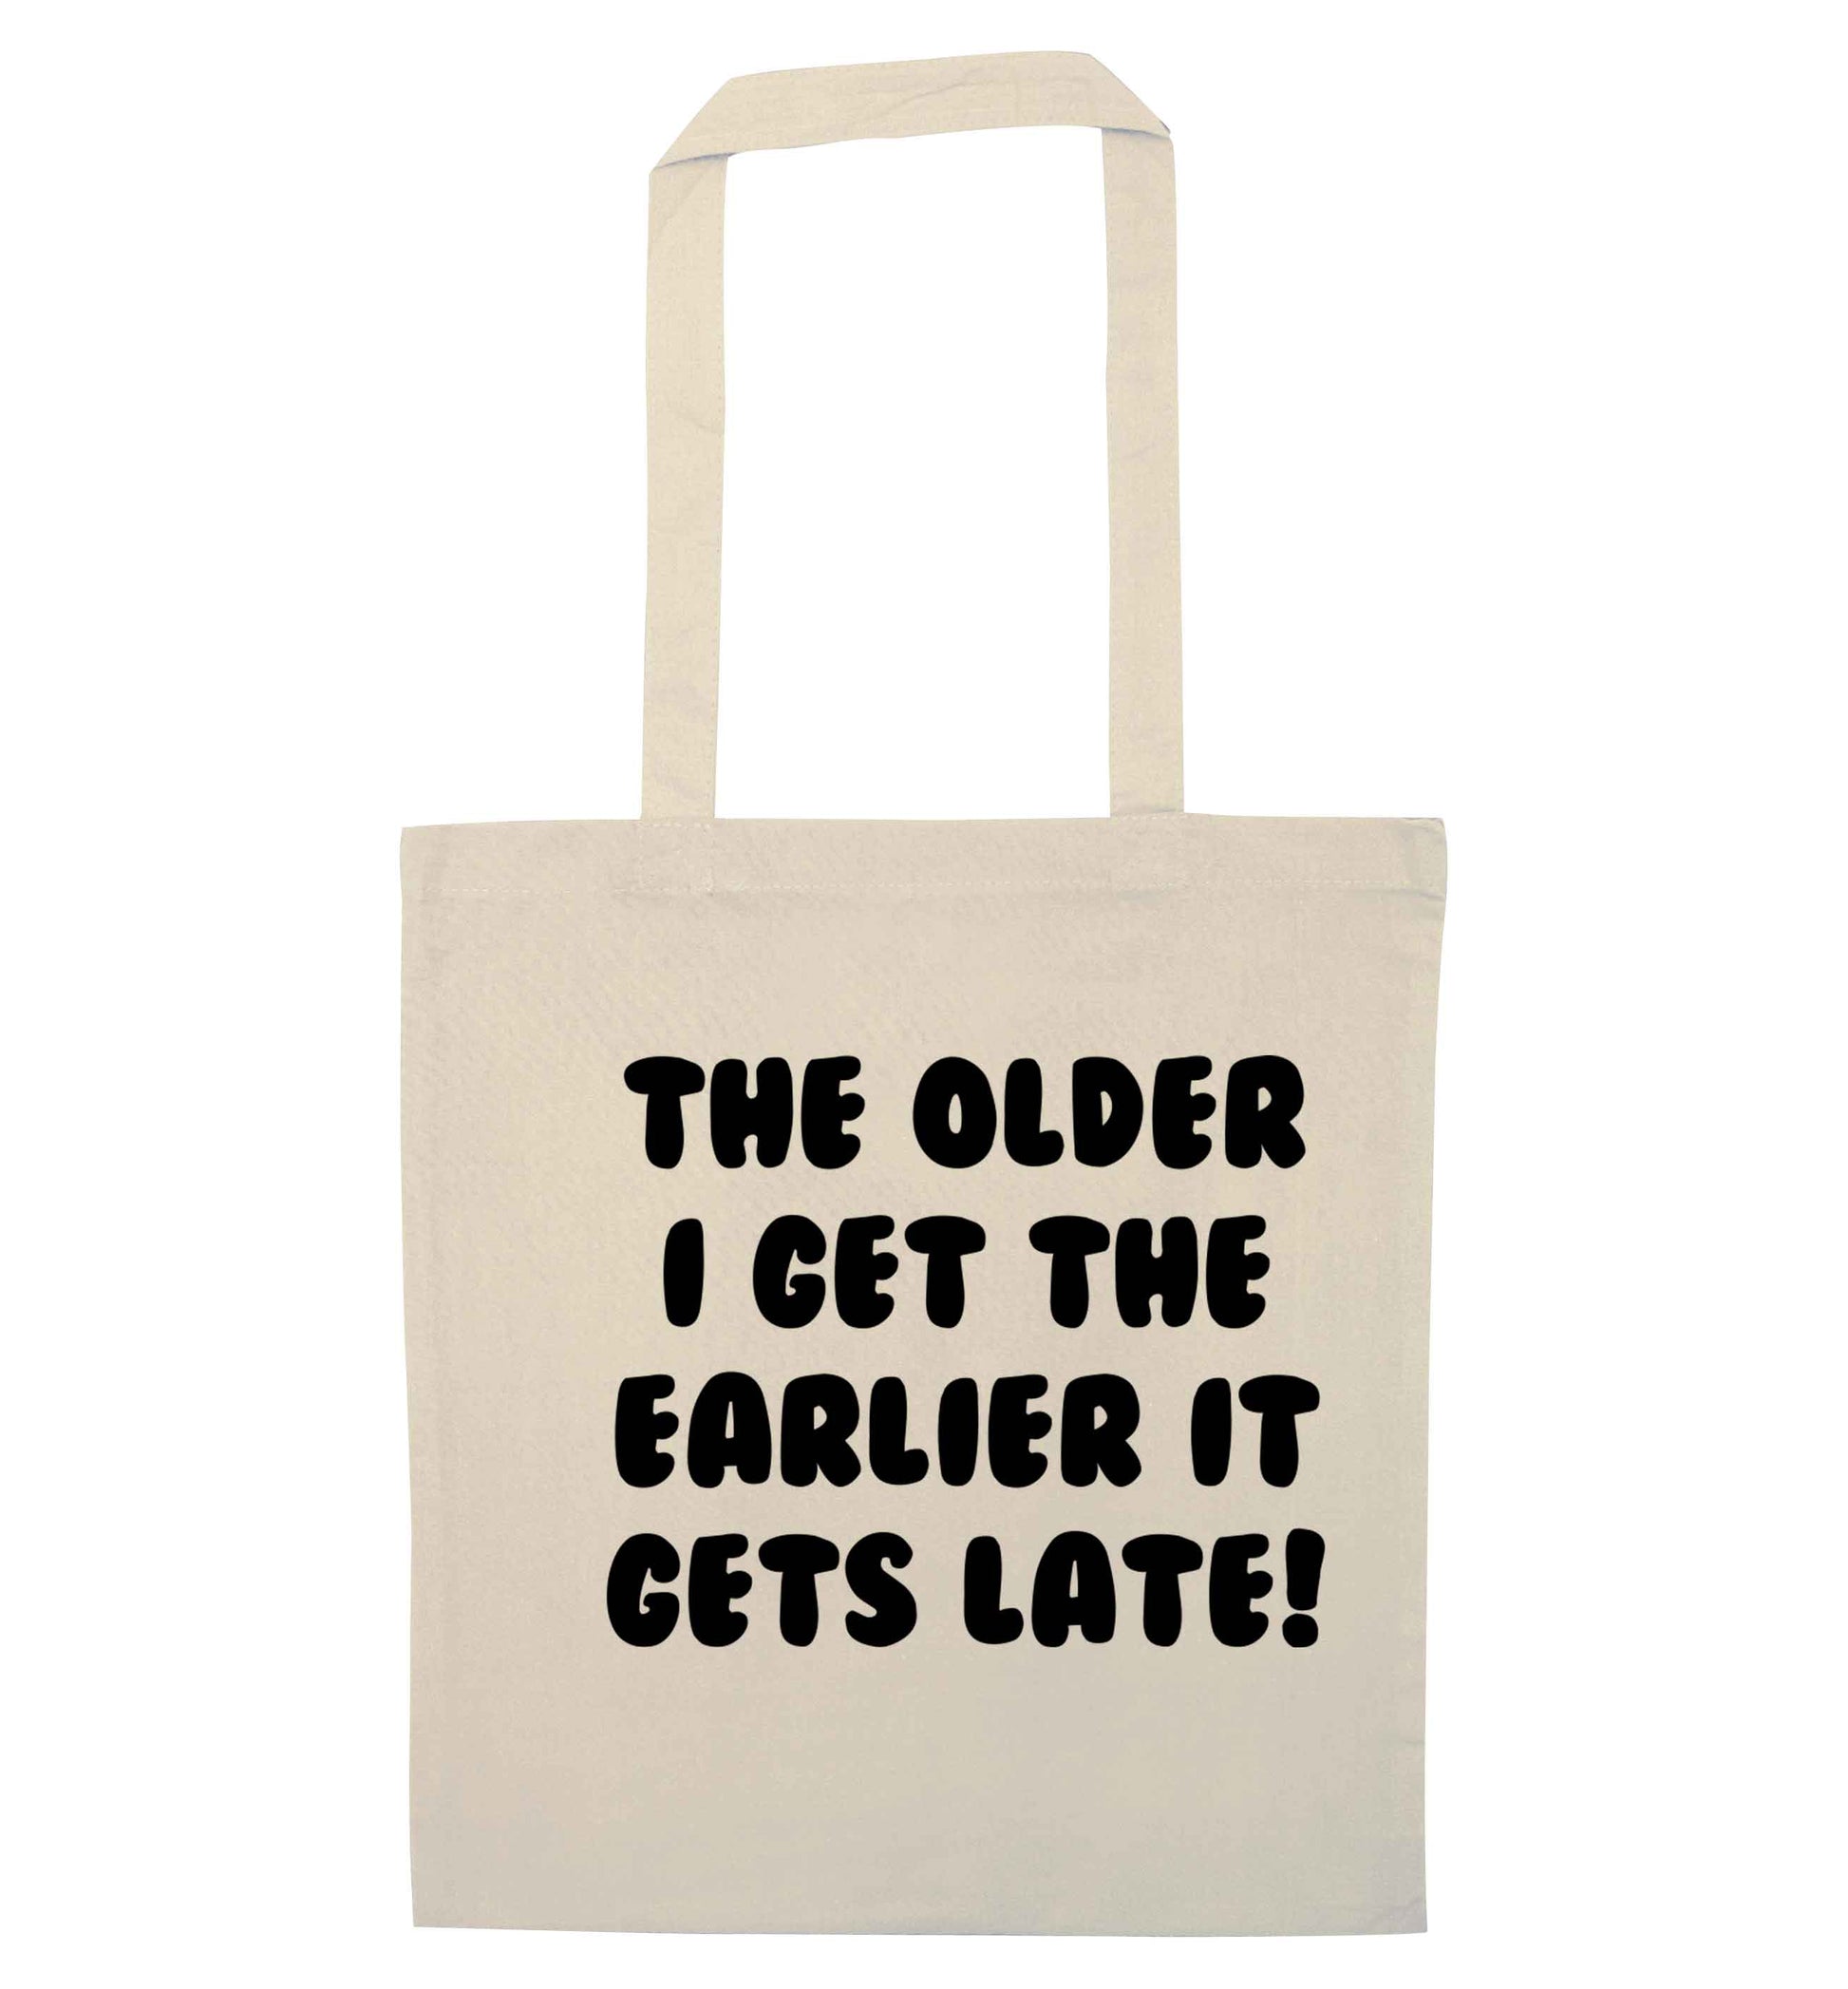 The older I get the earlier it gets late! natural tote bag